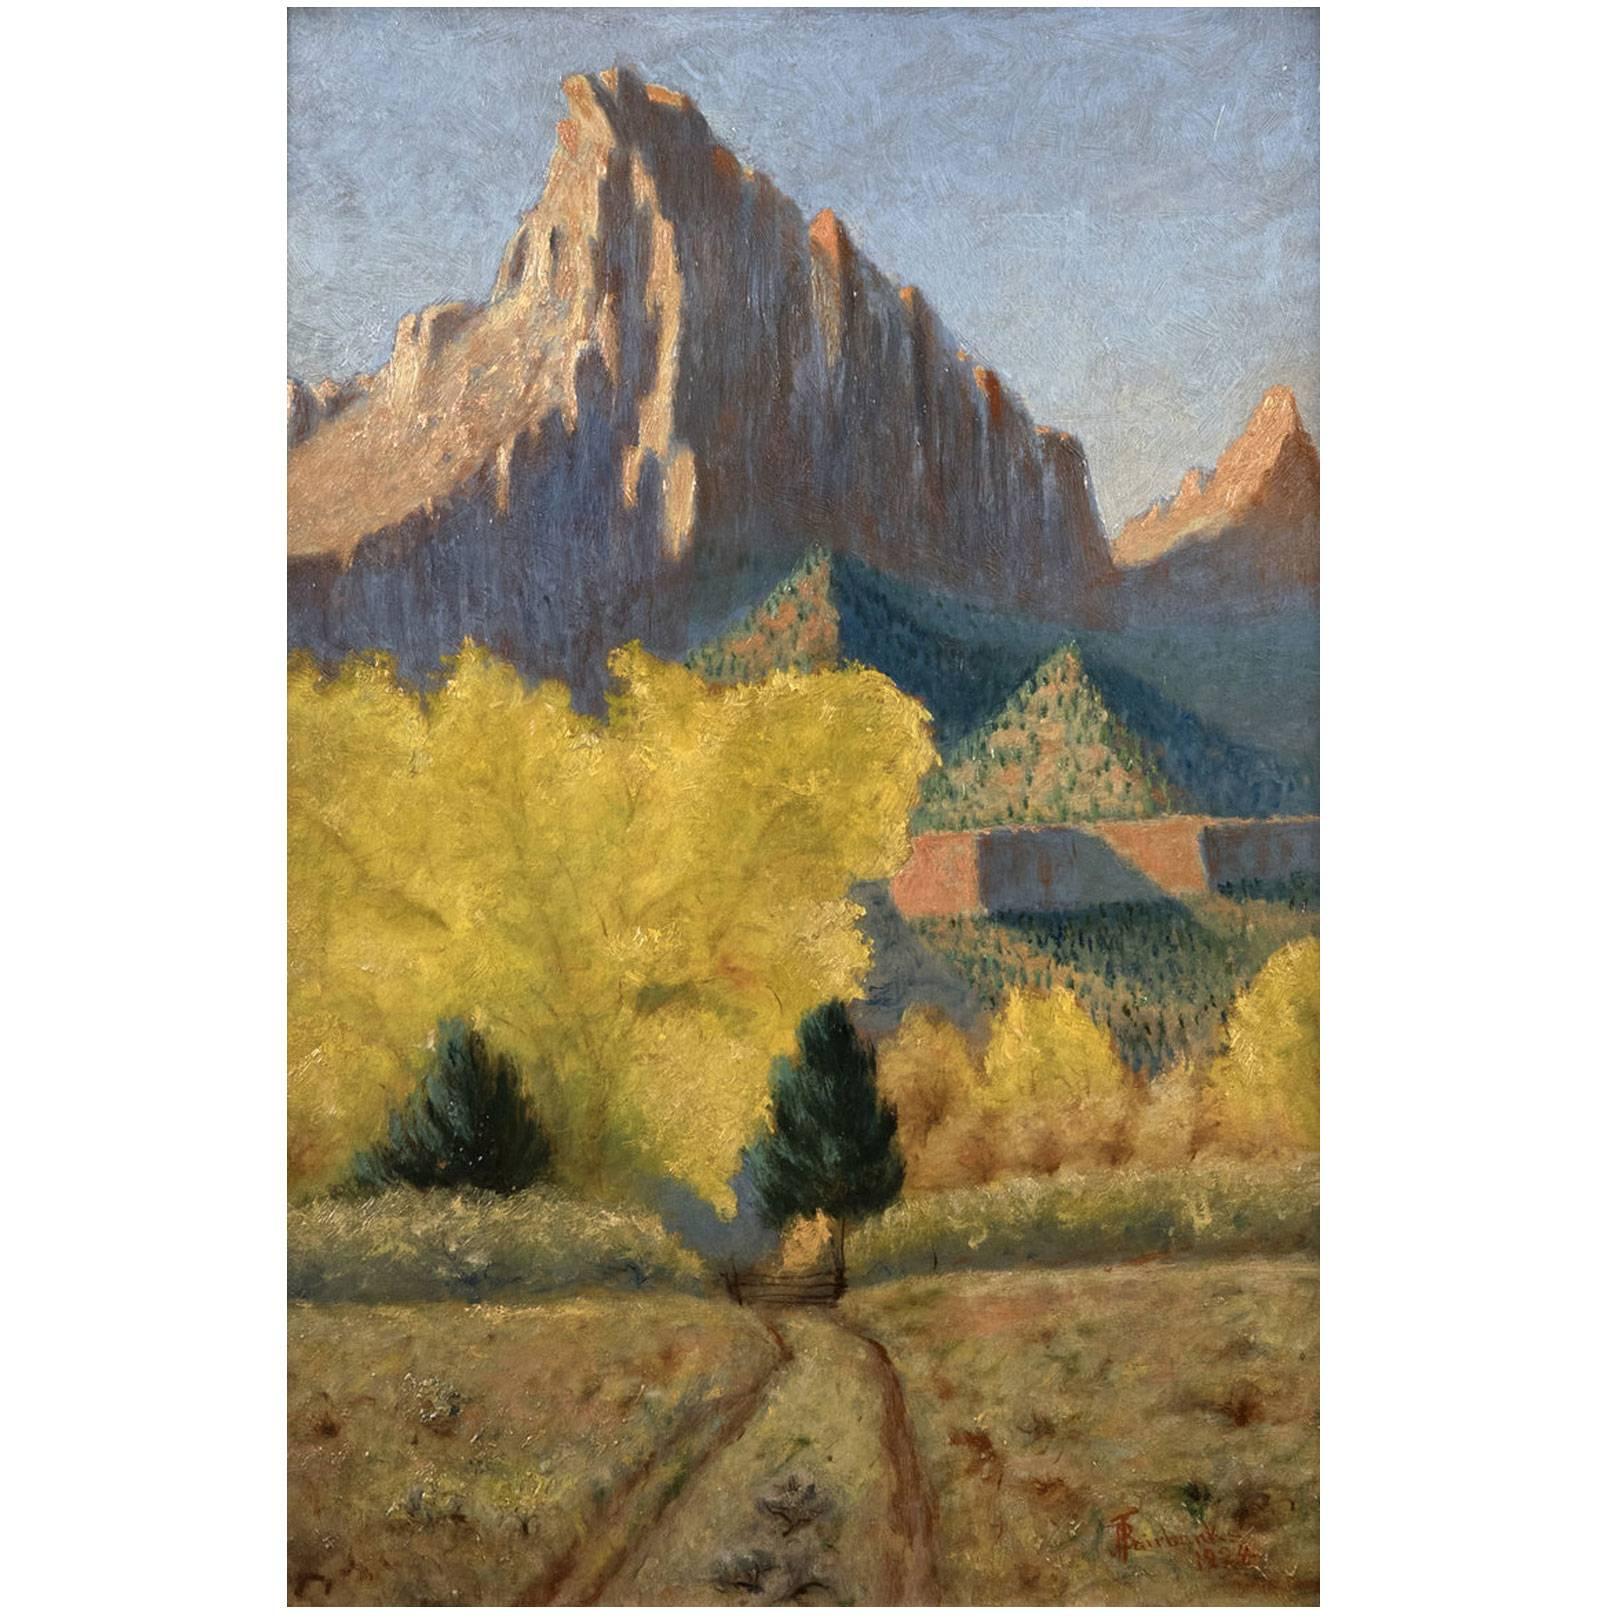 "Zions" Painting by JB Fairbanks